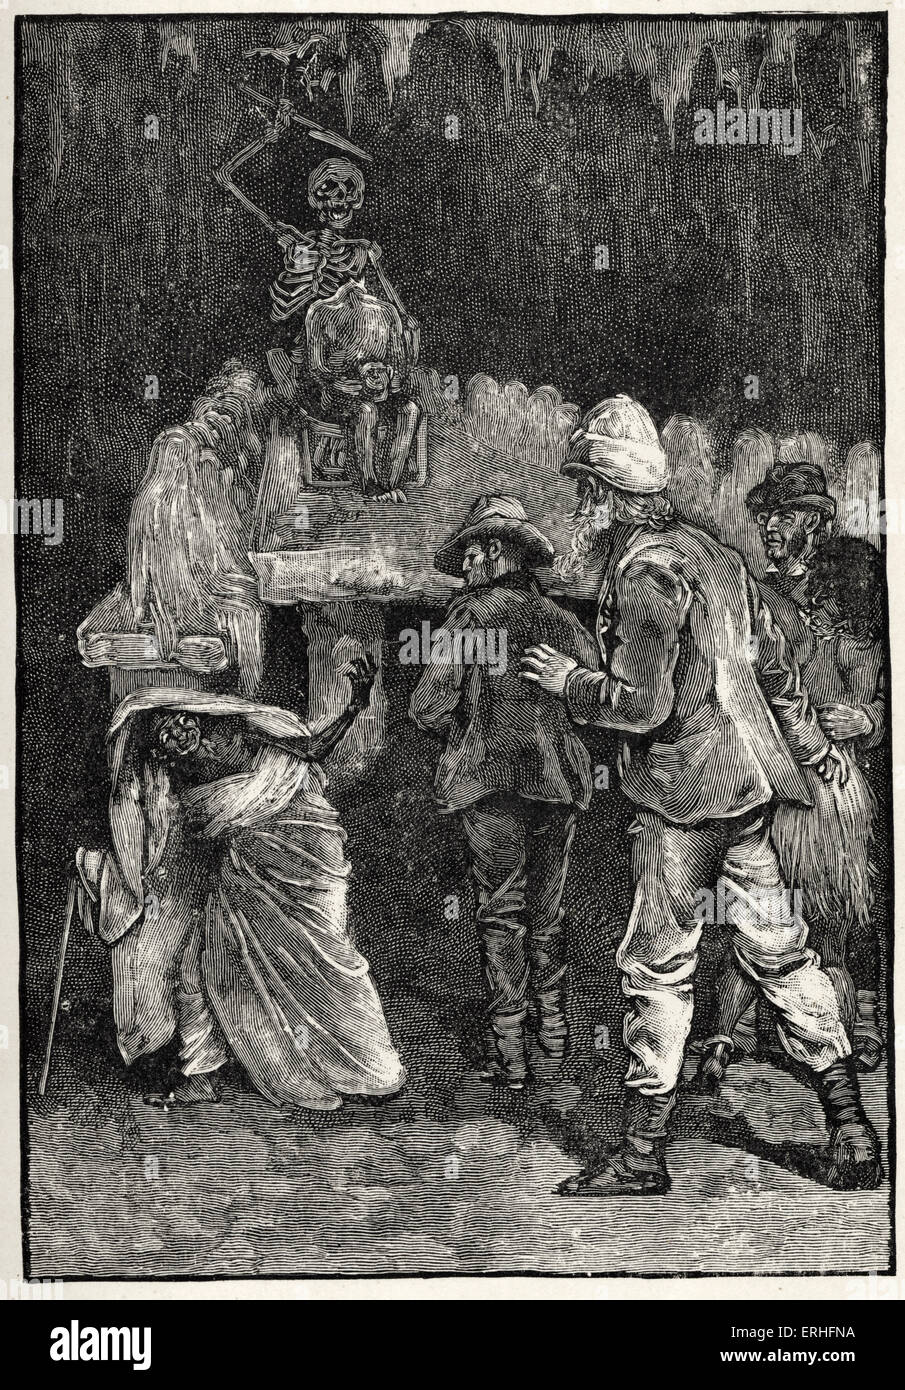 H. Rider Haggard's novel King Solomon's Mines.  Illustration by Walter Paget entitled 'To those who enter the hall of the dead, Stock Photo